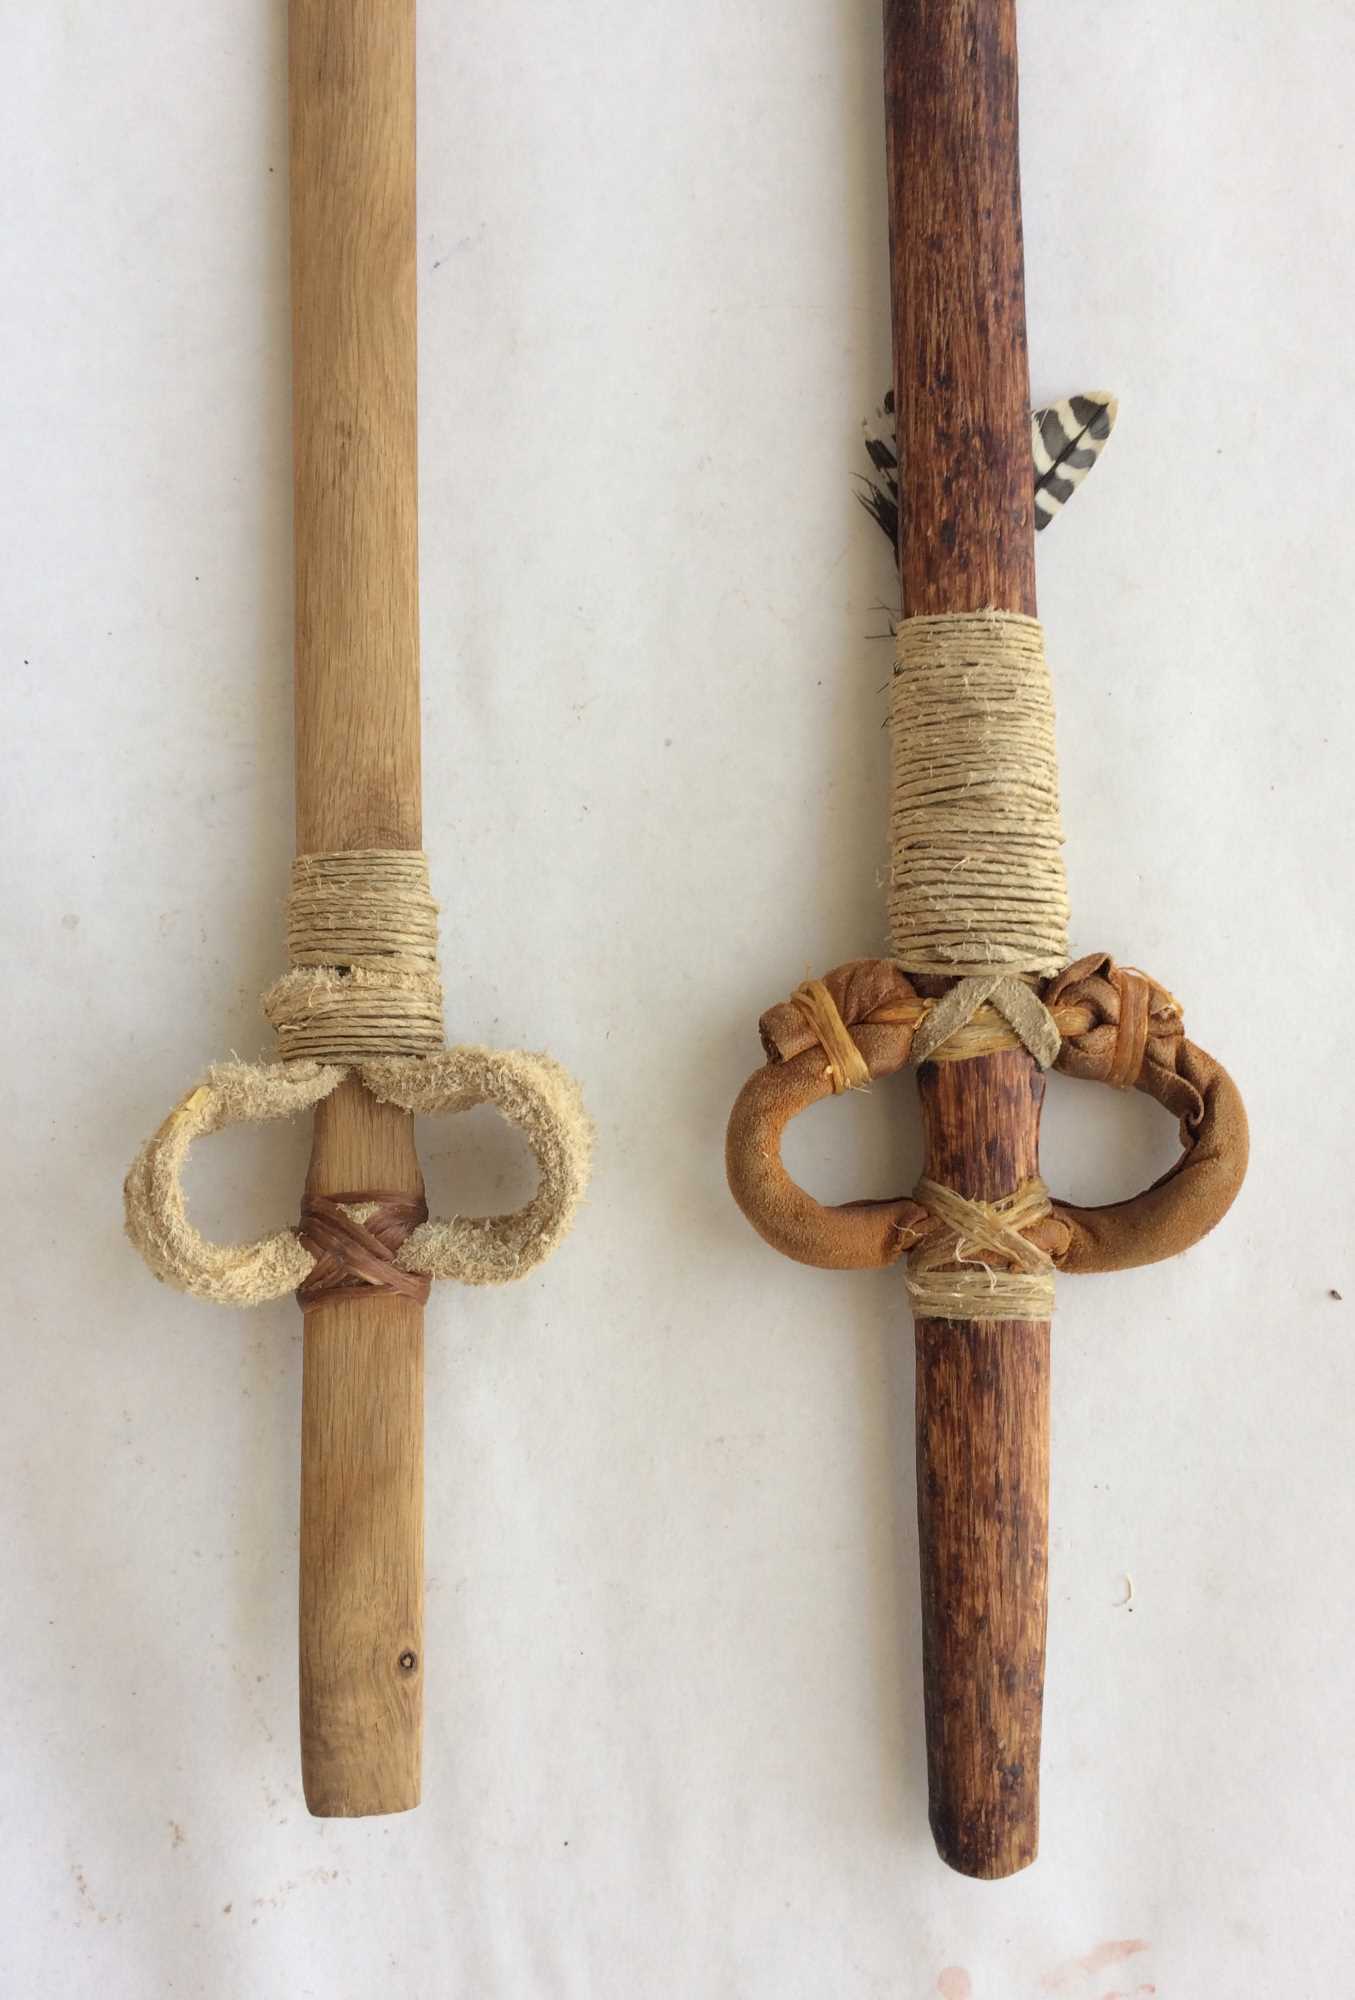 This style of atlatl, with leather loops, is known as the Basketmaker style. It is known from many examples found in rock shelters on the Colorado Plateau. These are replicas.